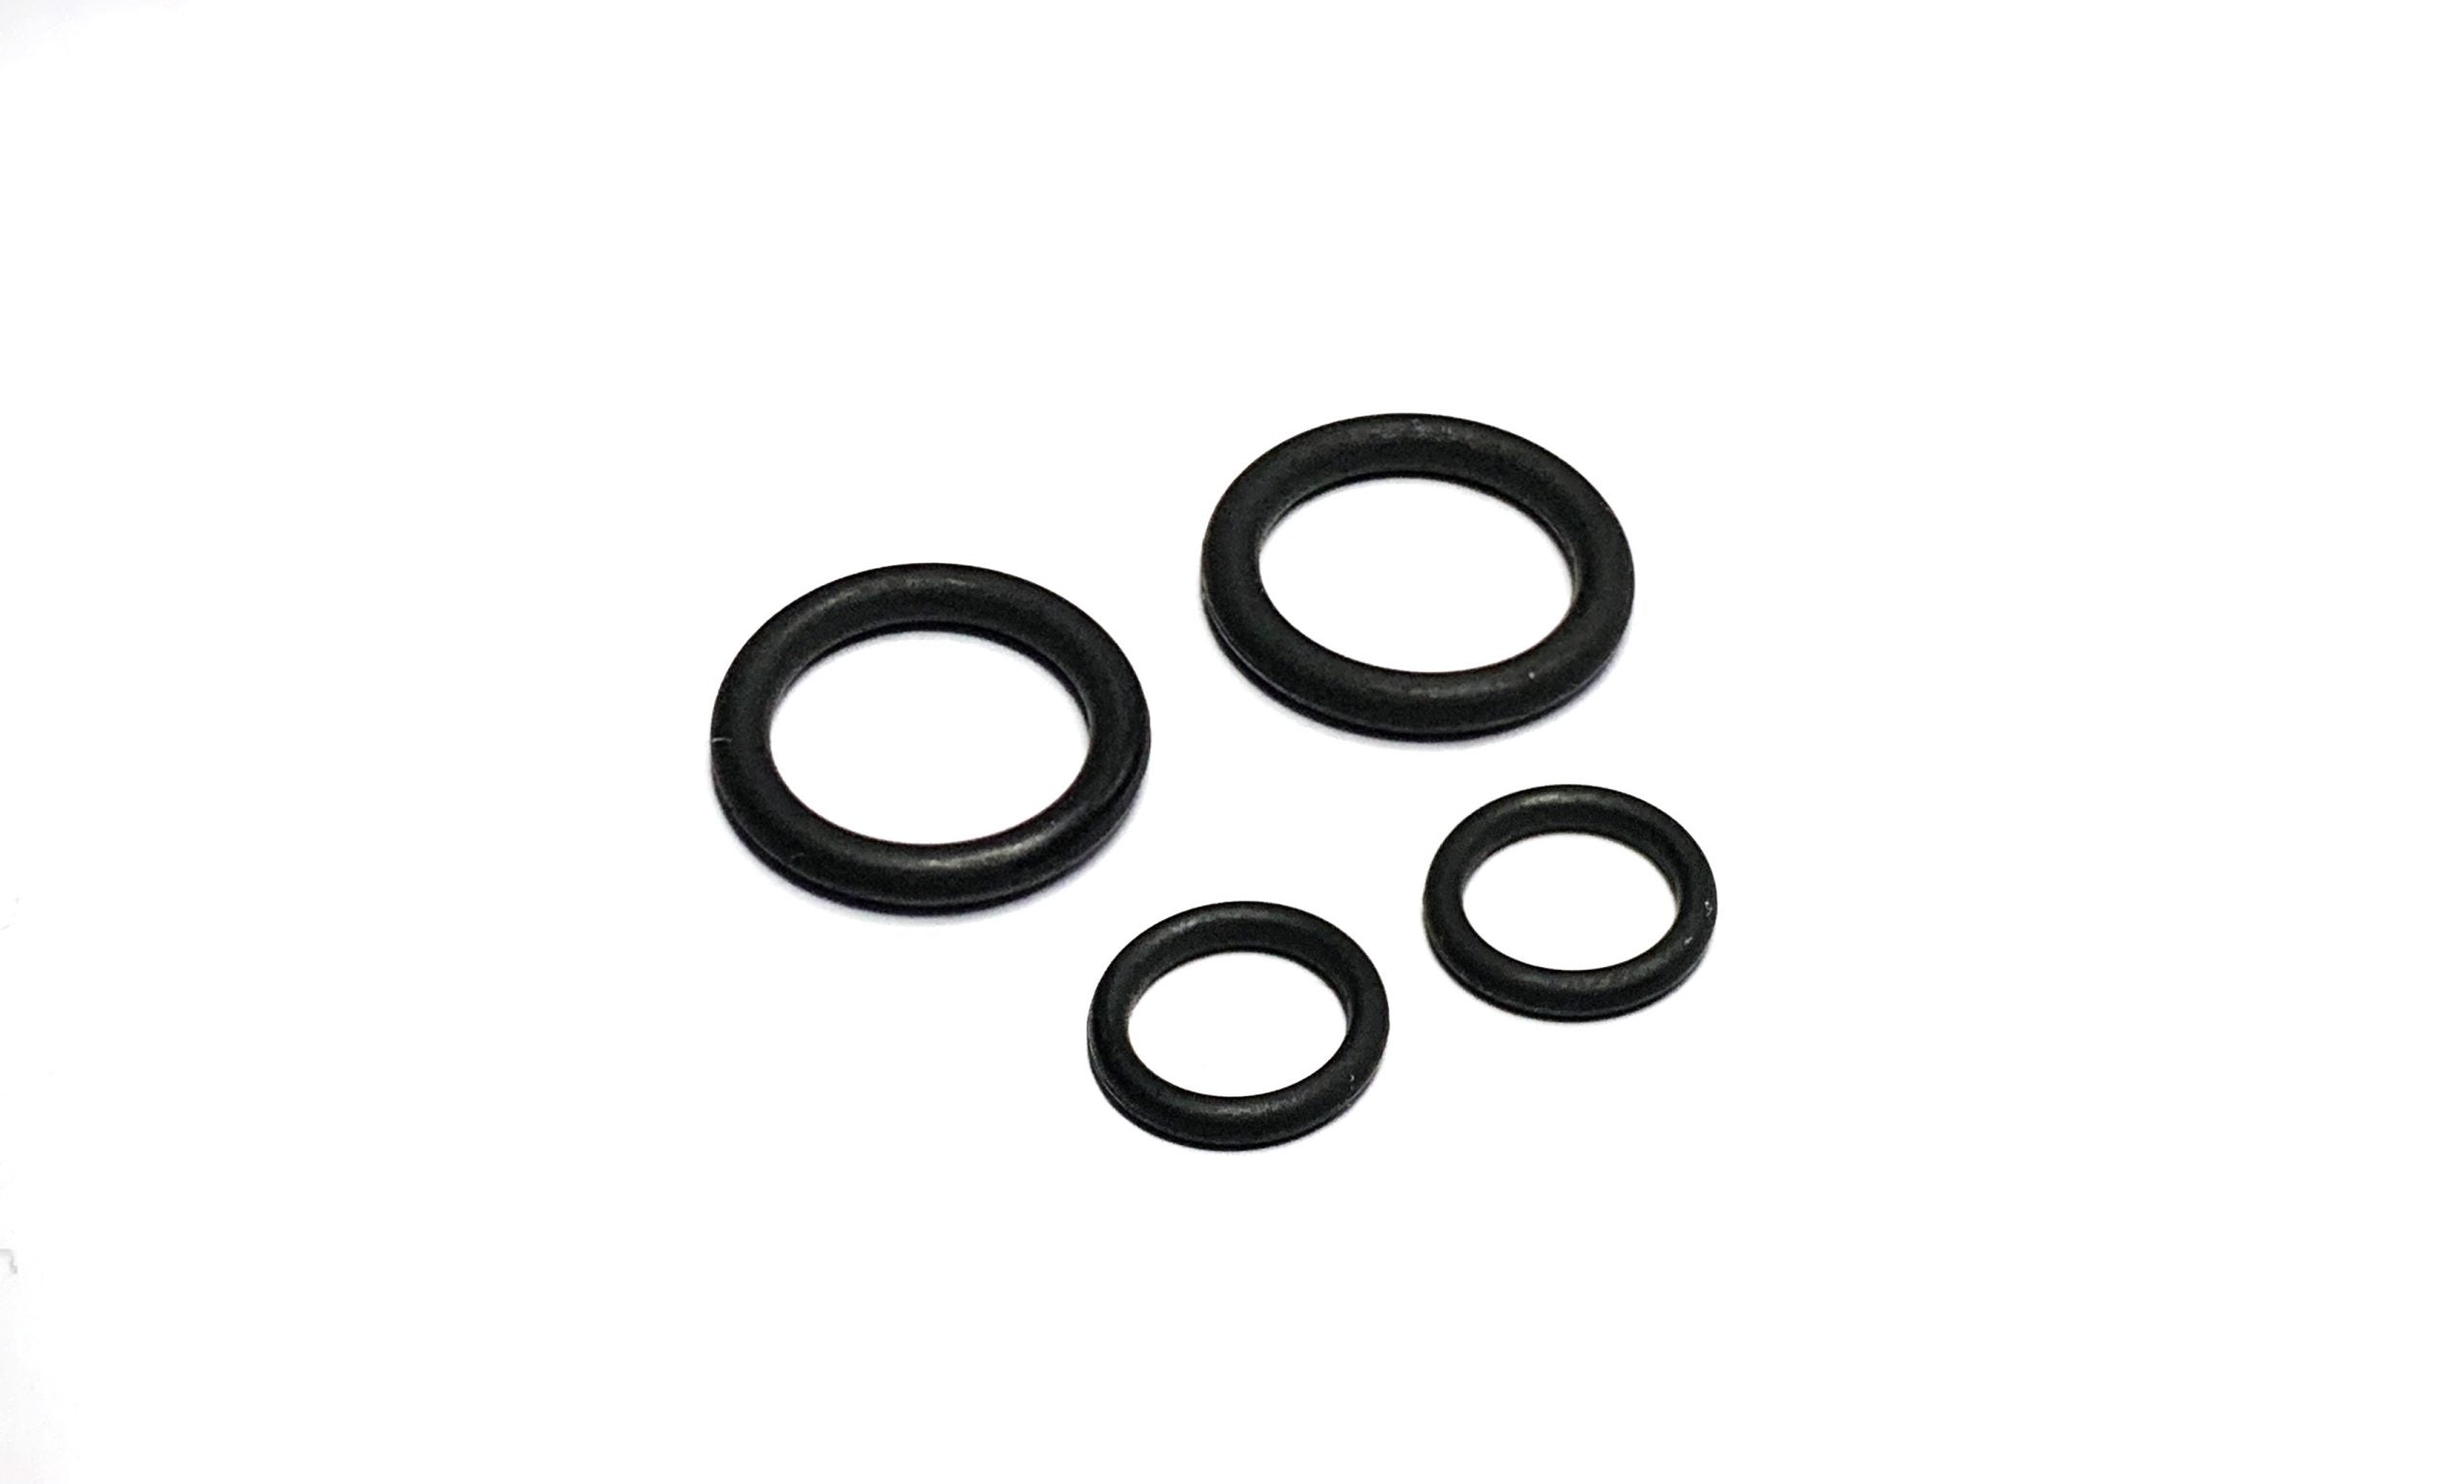 Replacement O-Rings for RigidCore™ RAW and Kraken 700 Dampeners